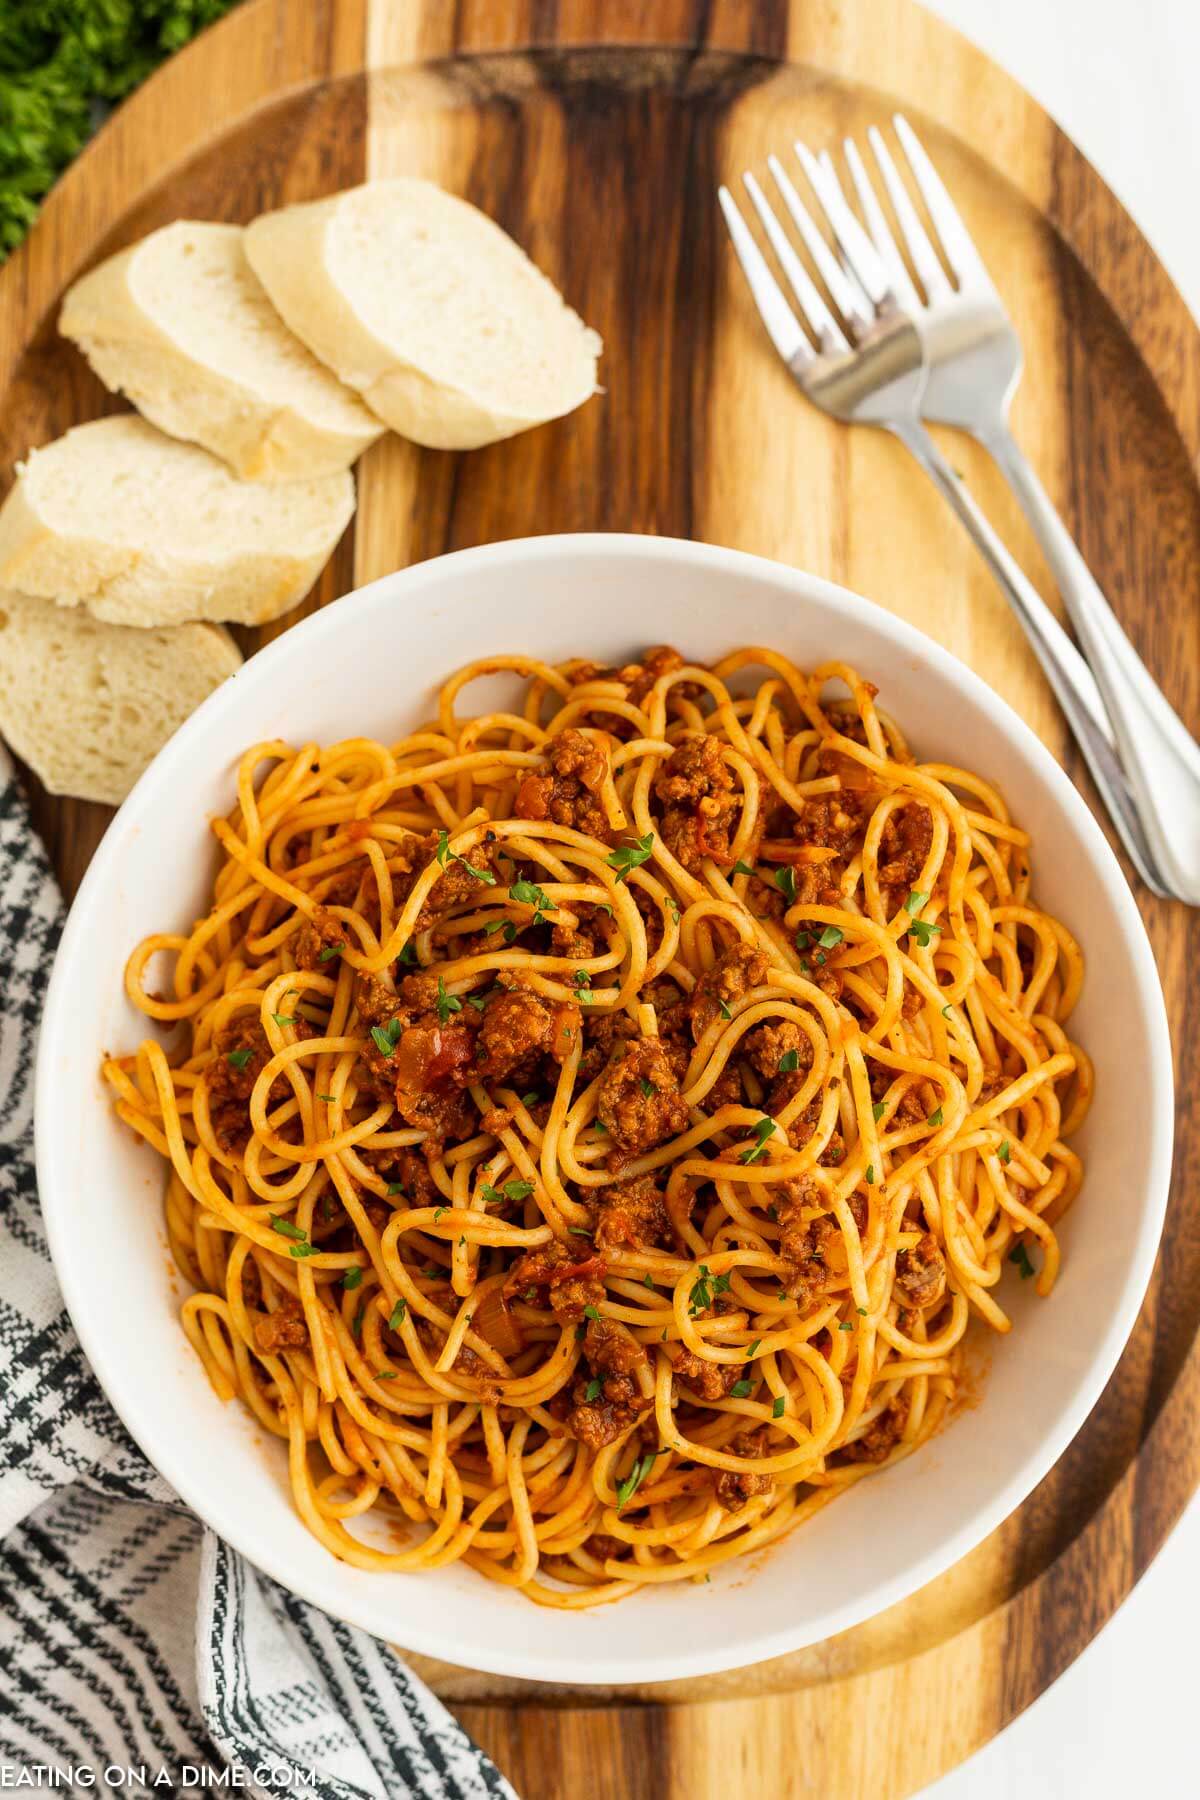 Bolognese Sauce mixed with spaghetti noodles in a white bowl